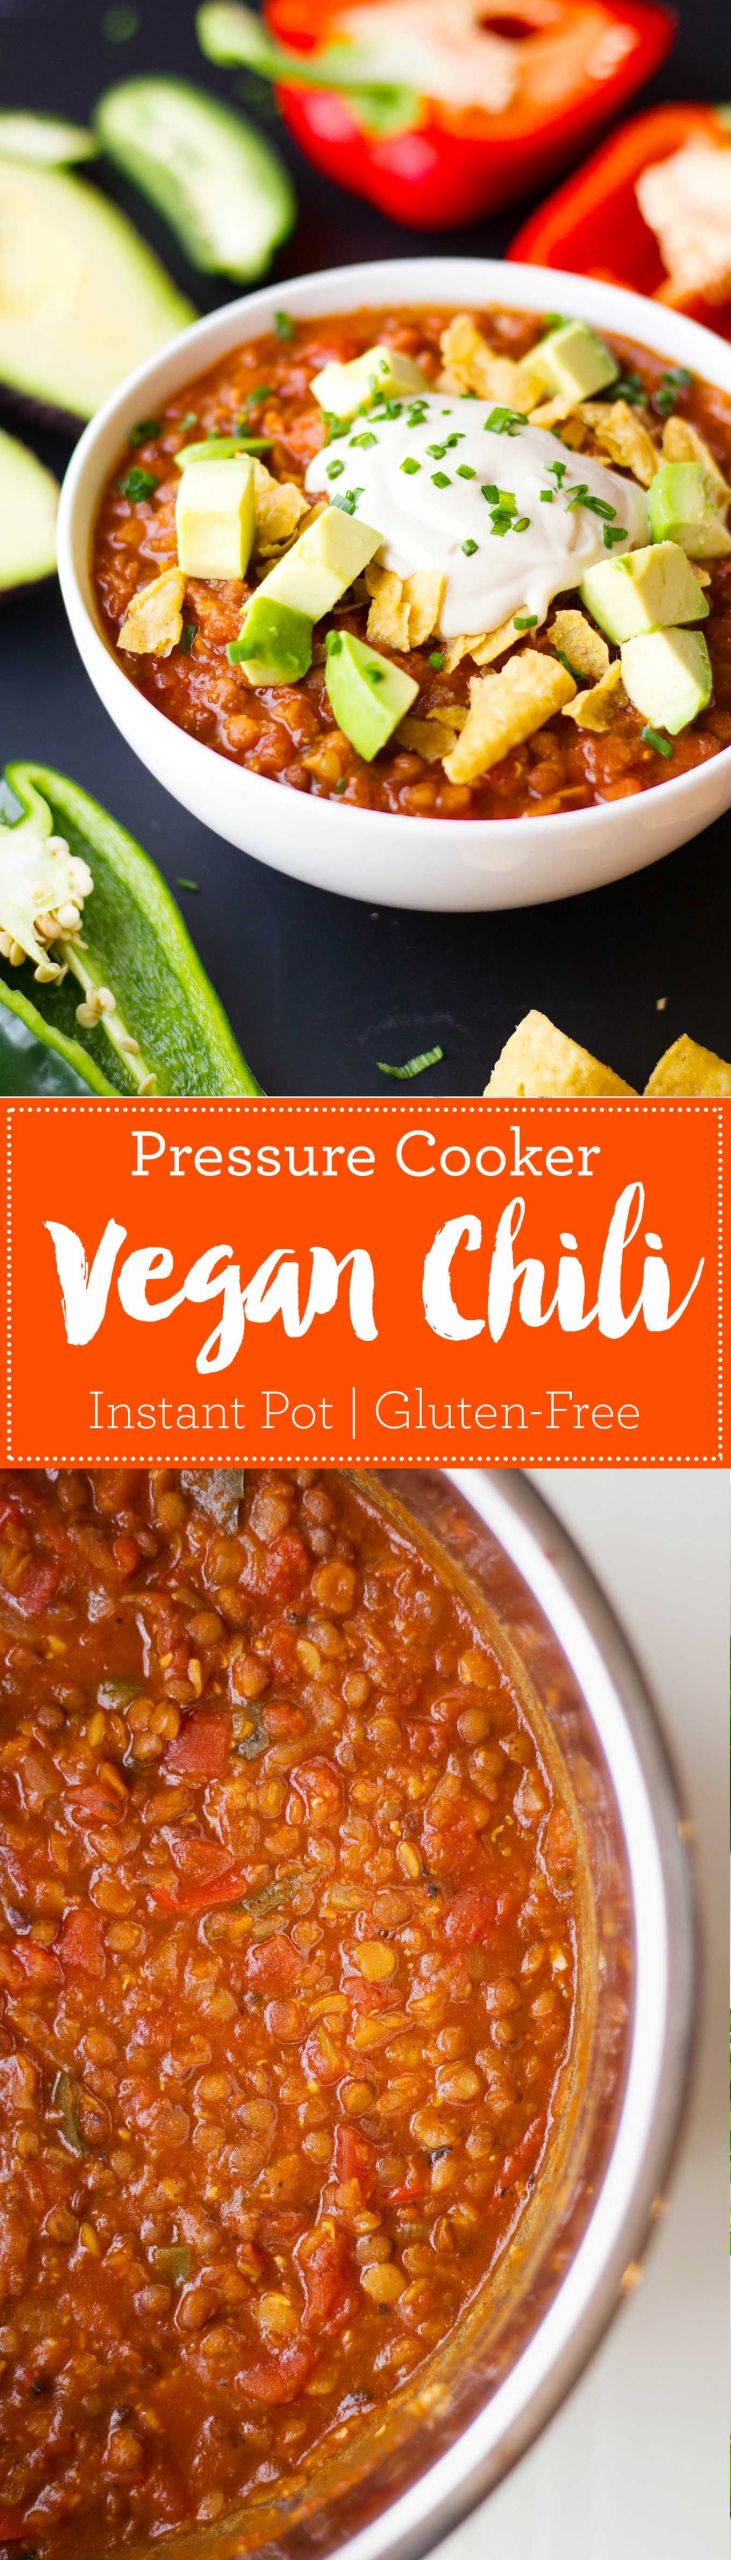 The Best Ideas for Pressure Cooker Vegetarian Chili - Best Recipes ...